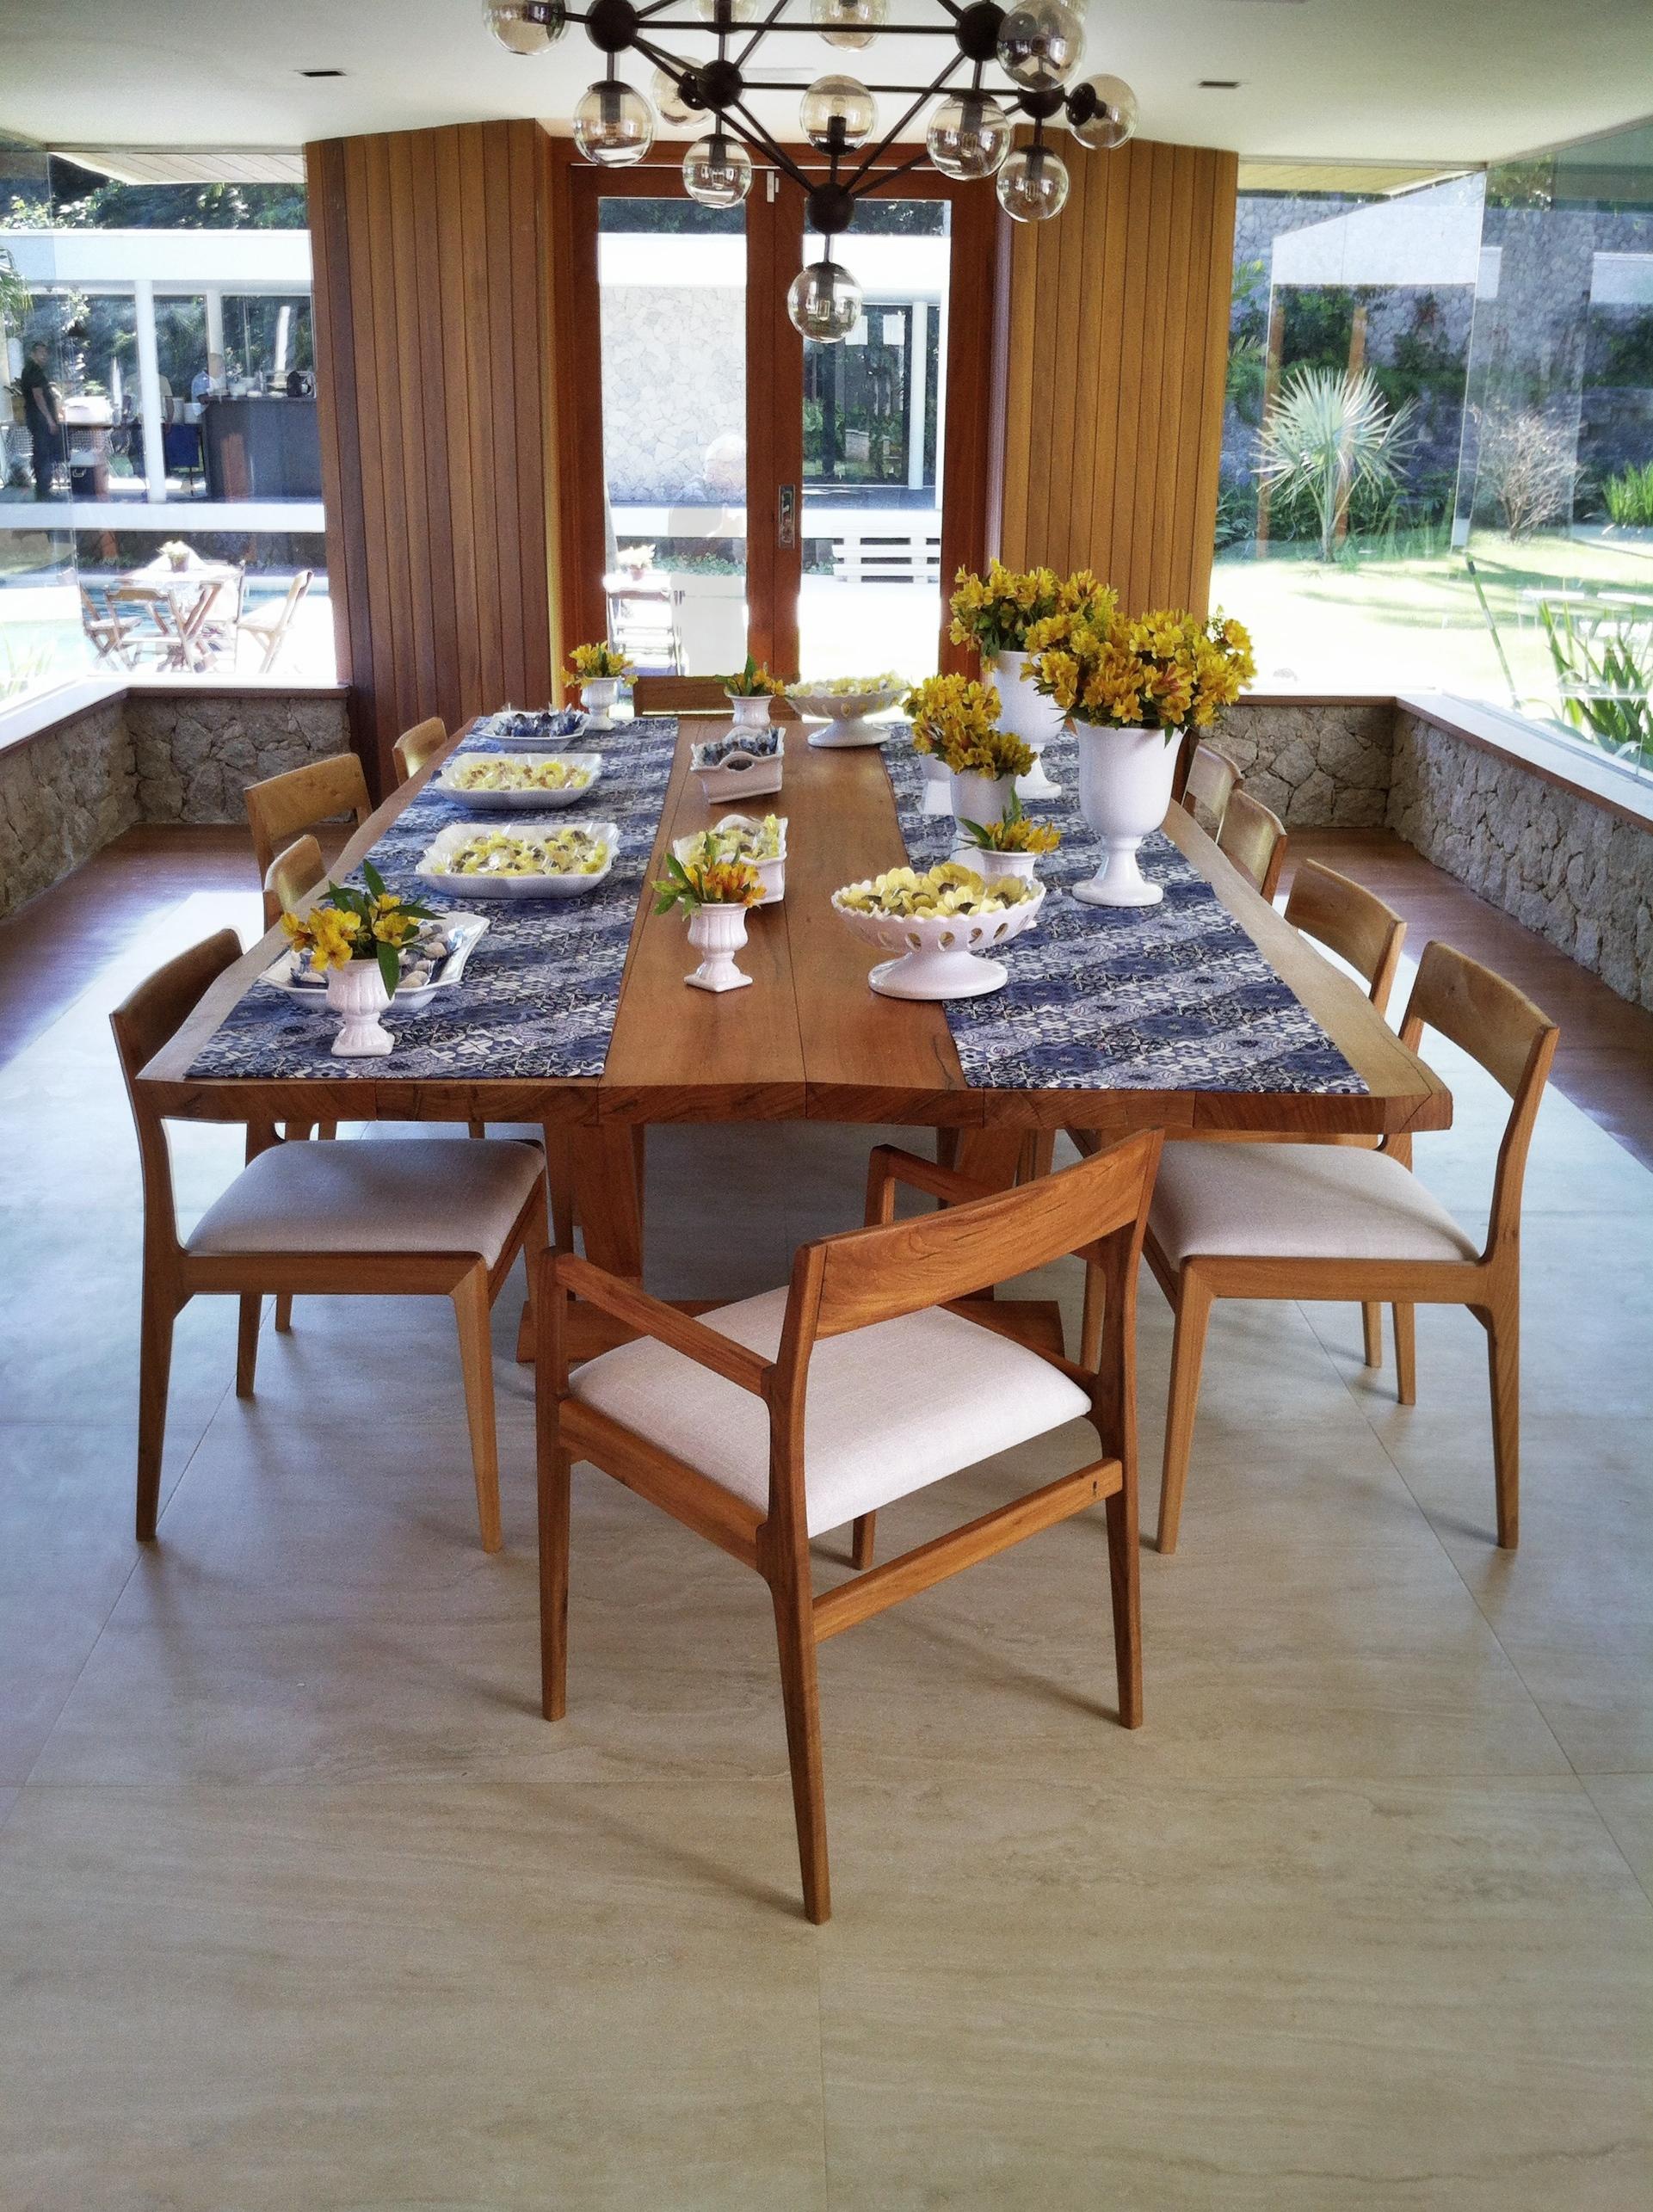 Contemporary dining table made with selected tropical Brazilian hardwood. Contemporary Brazilian design.

This dining table has a solid knock down tabletop and strong base assembled with traditional wood joints. It can be custom made.
